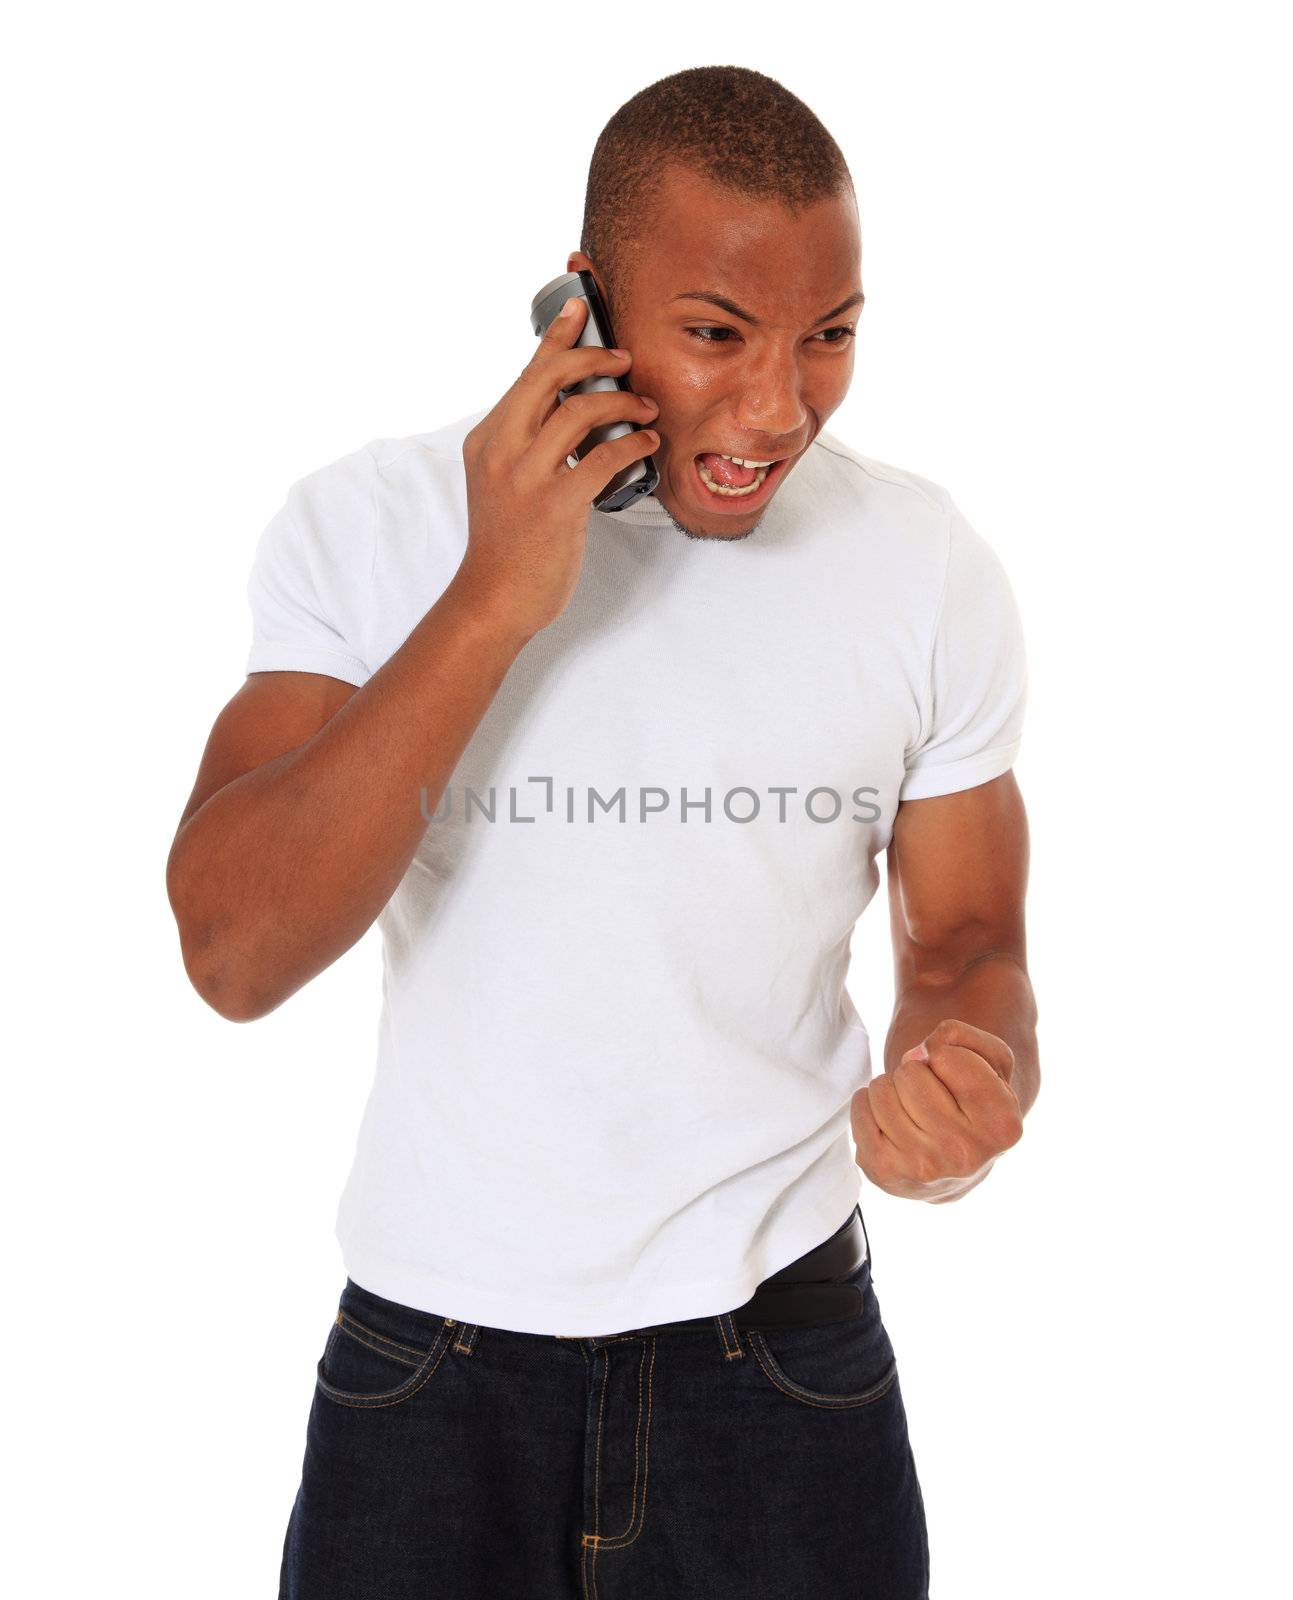 Attractive black man being angry during phone call. All on white background.